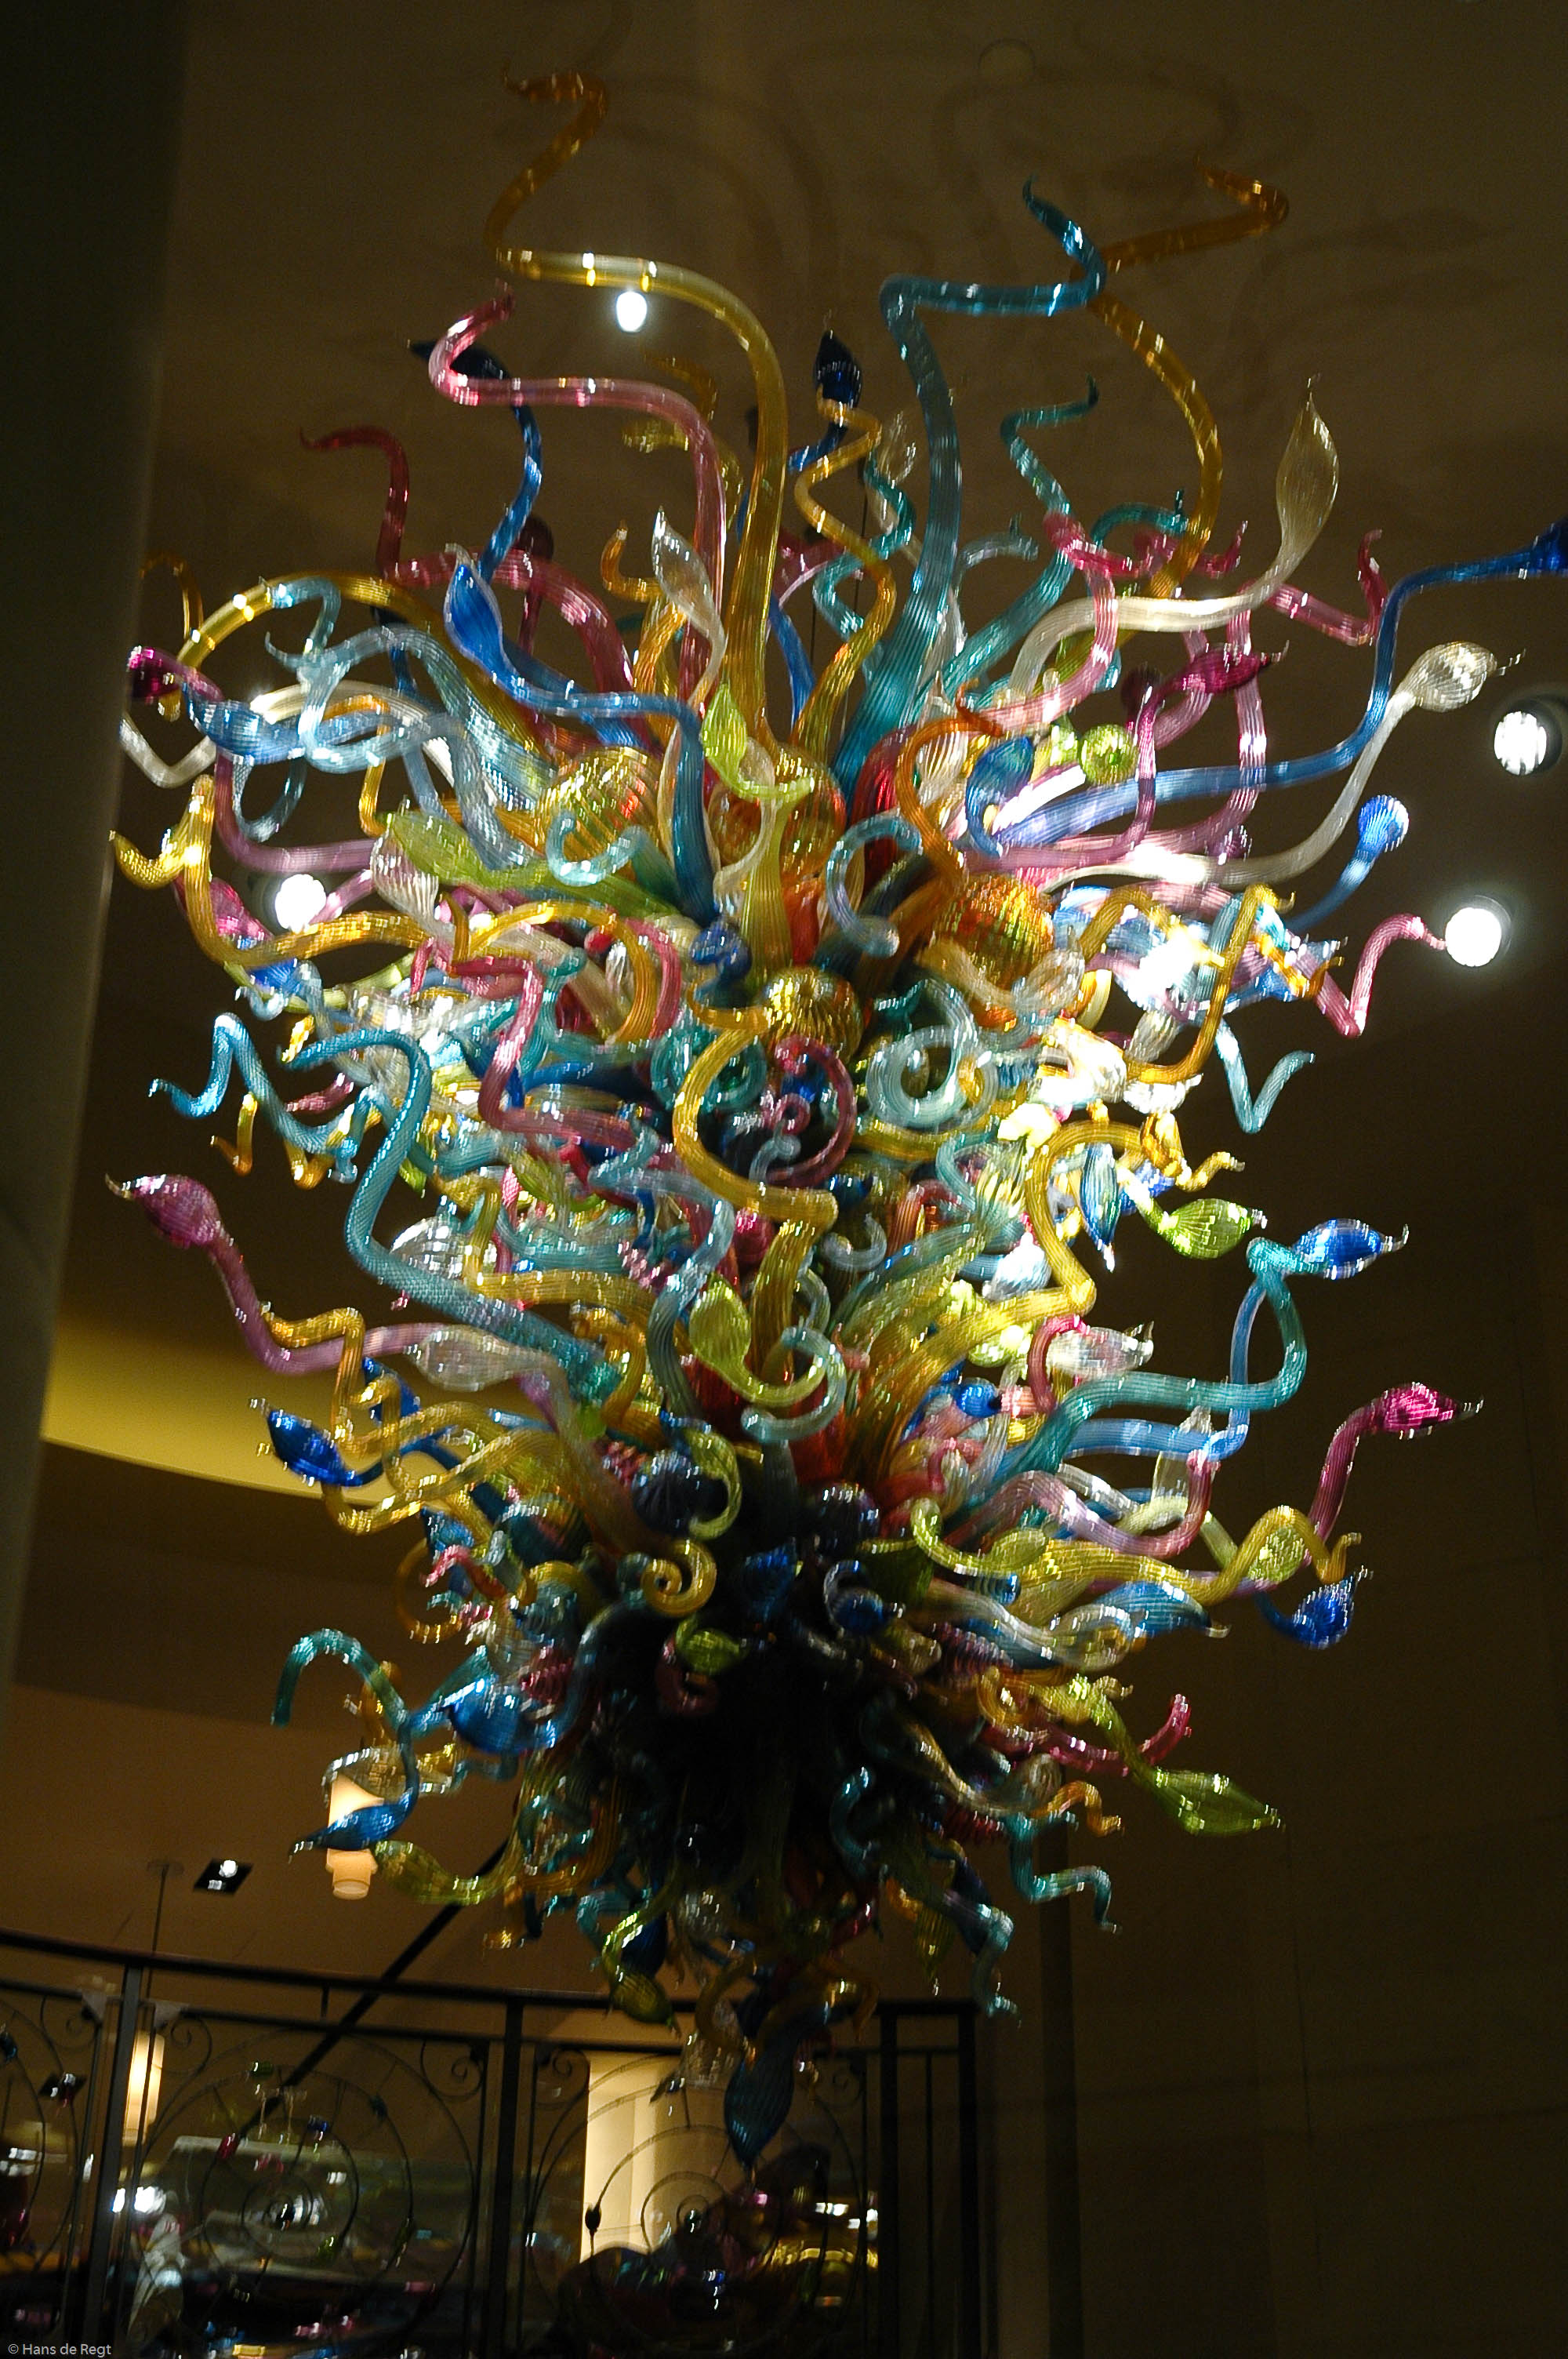 glass sculpture of Dale Chihuly in Specchio by